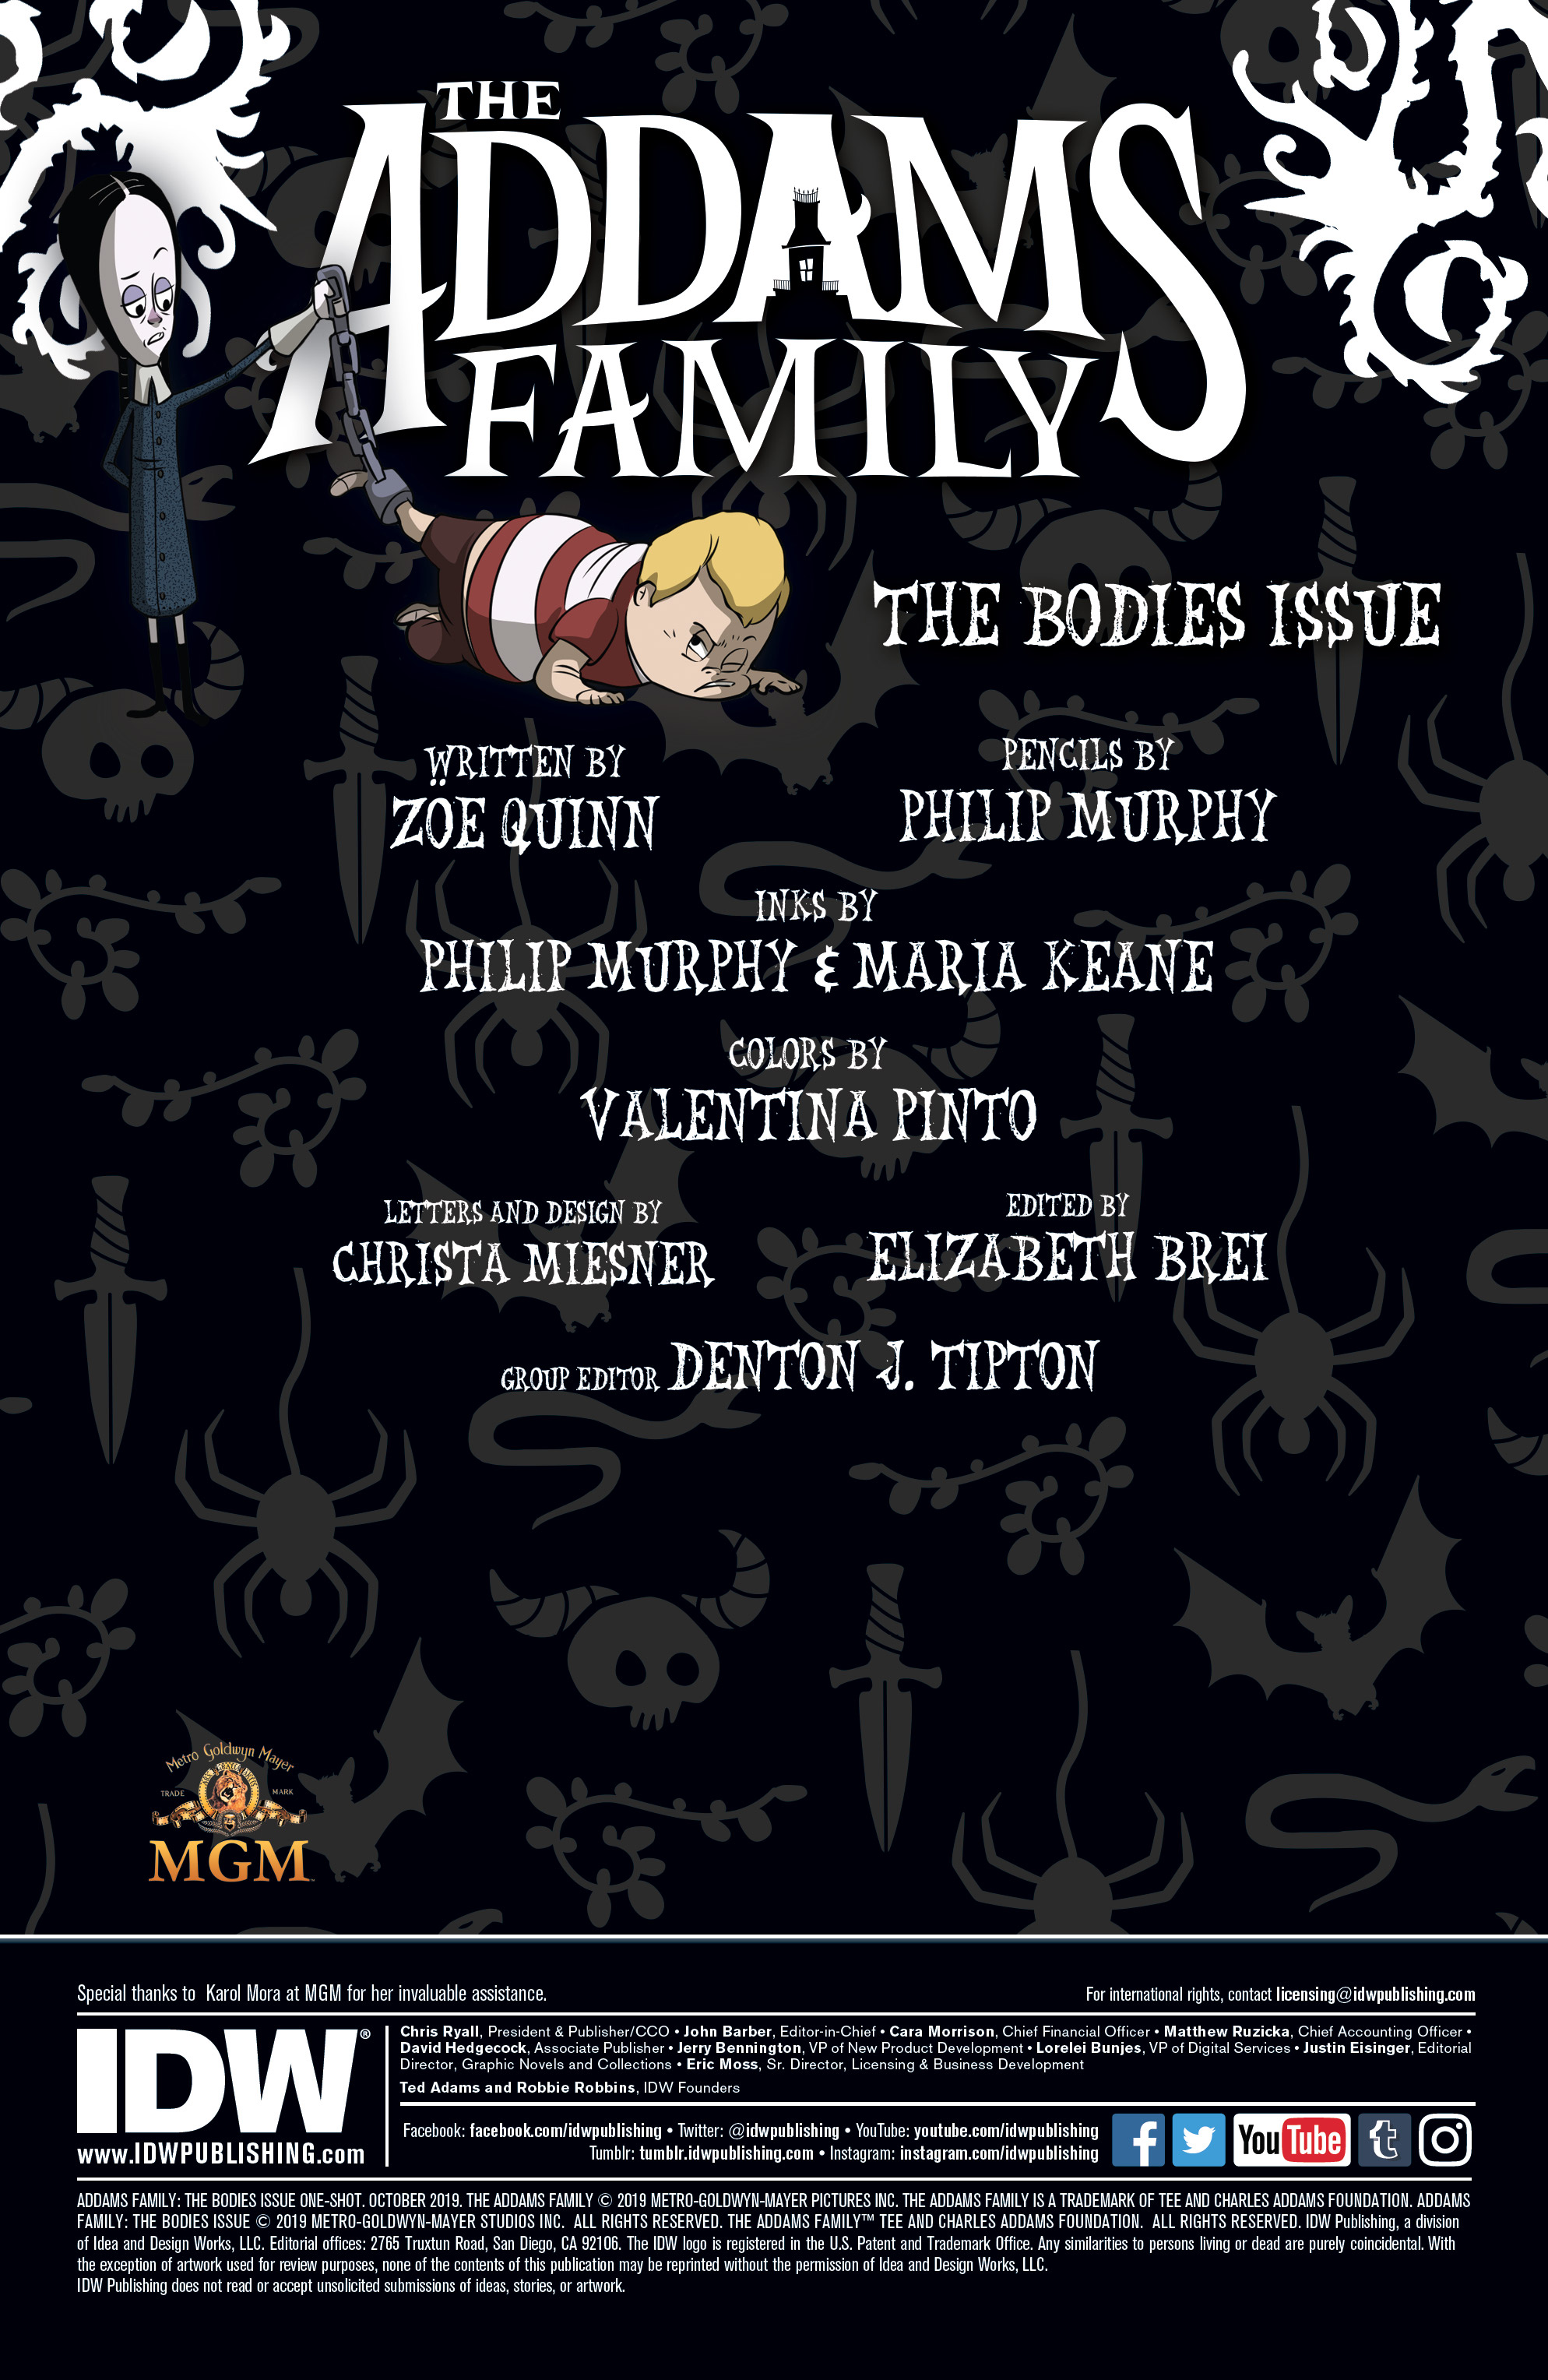 Read online Addams Family: The Bodies Issue comic -  Issue # Full - 2